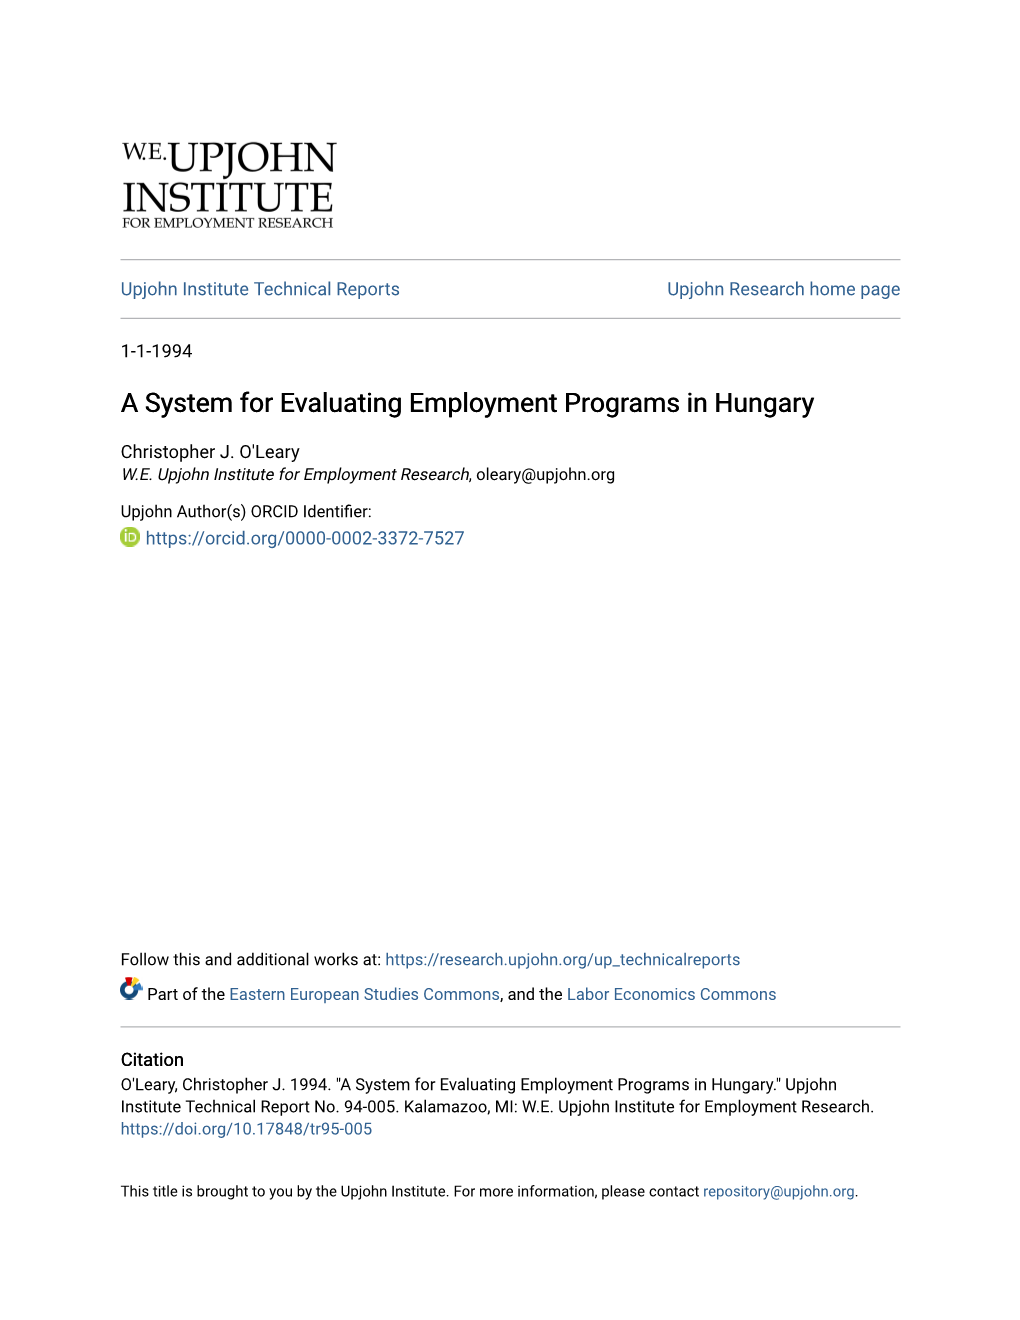 A System for Evaluating Employment Programs in Hungary